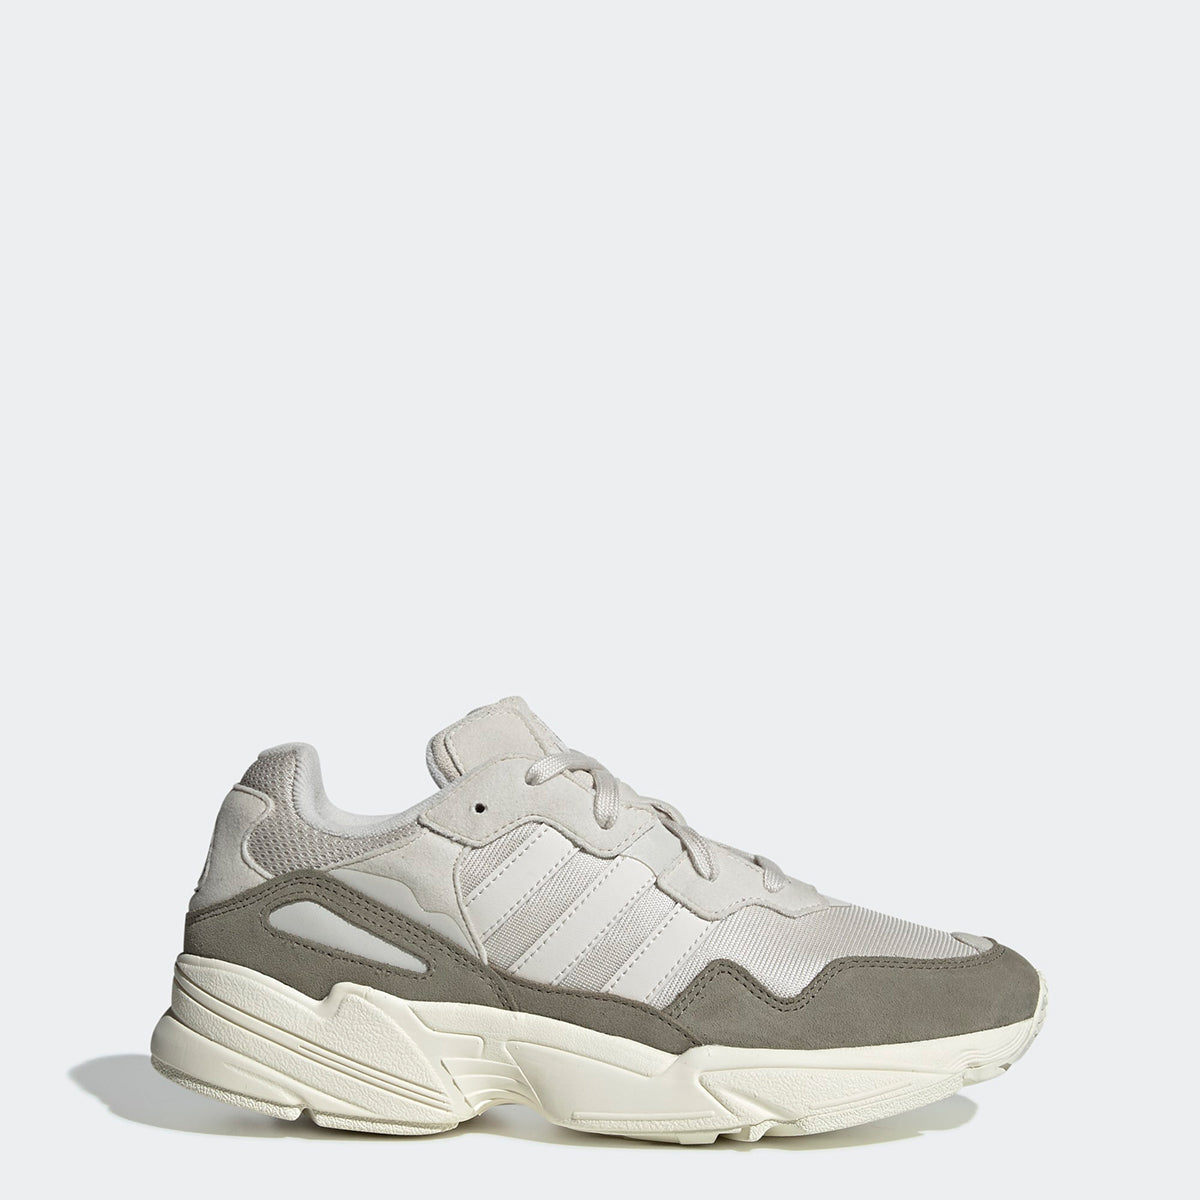 adidas Yung-96 Shoes Raw White EE7244 